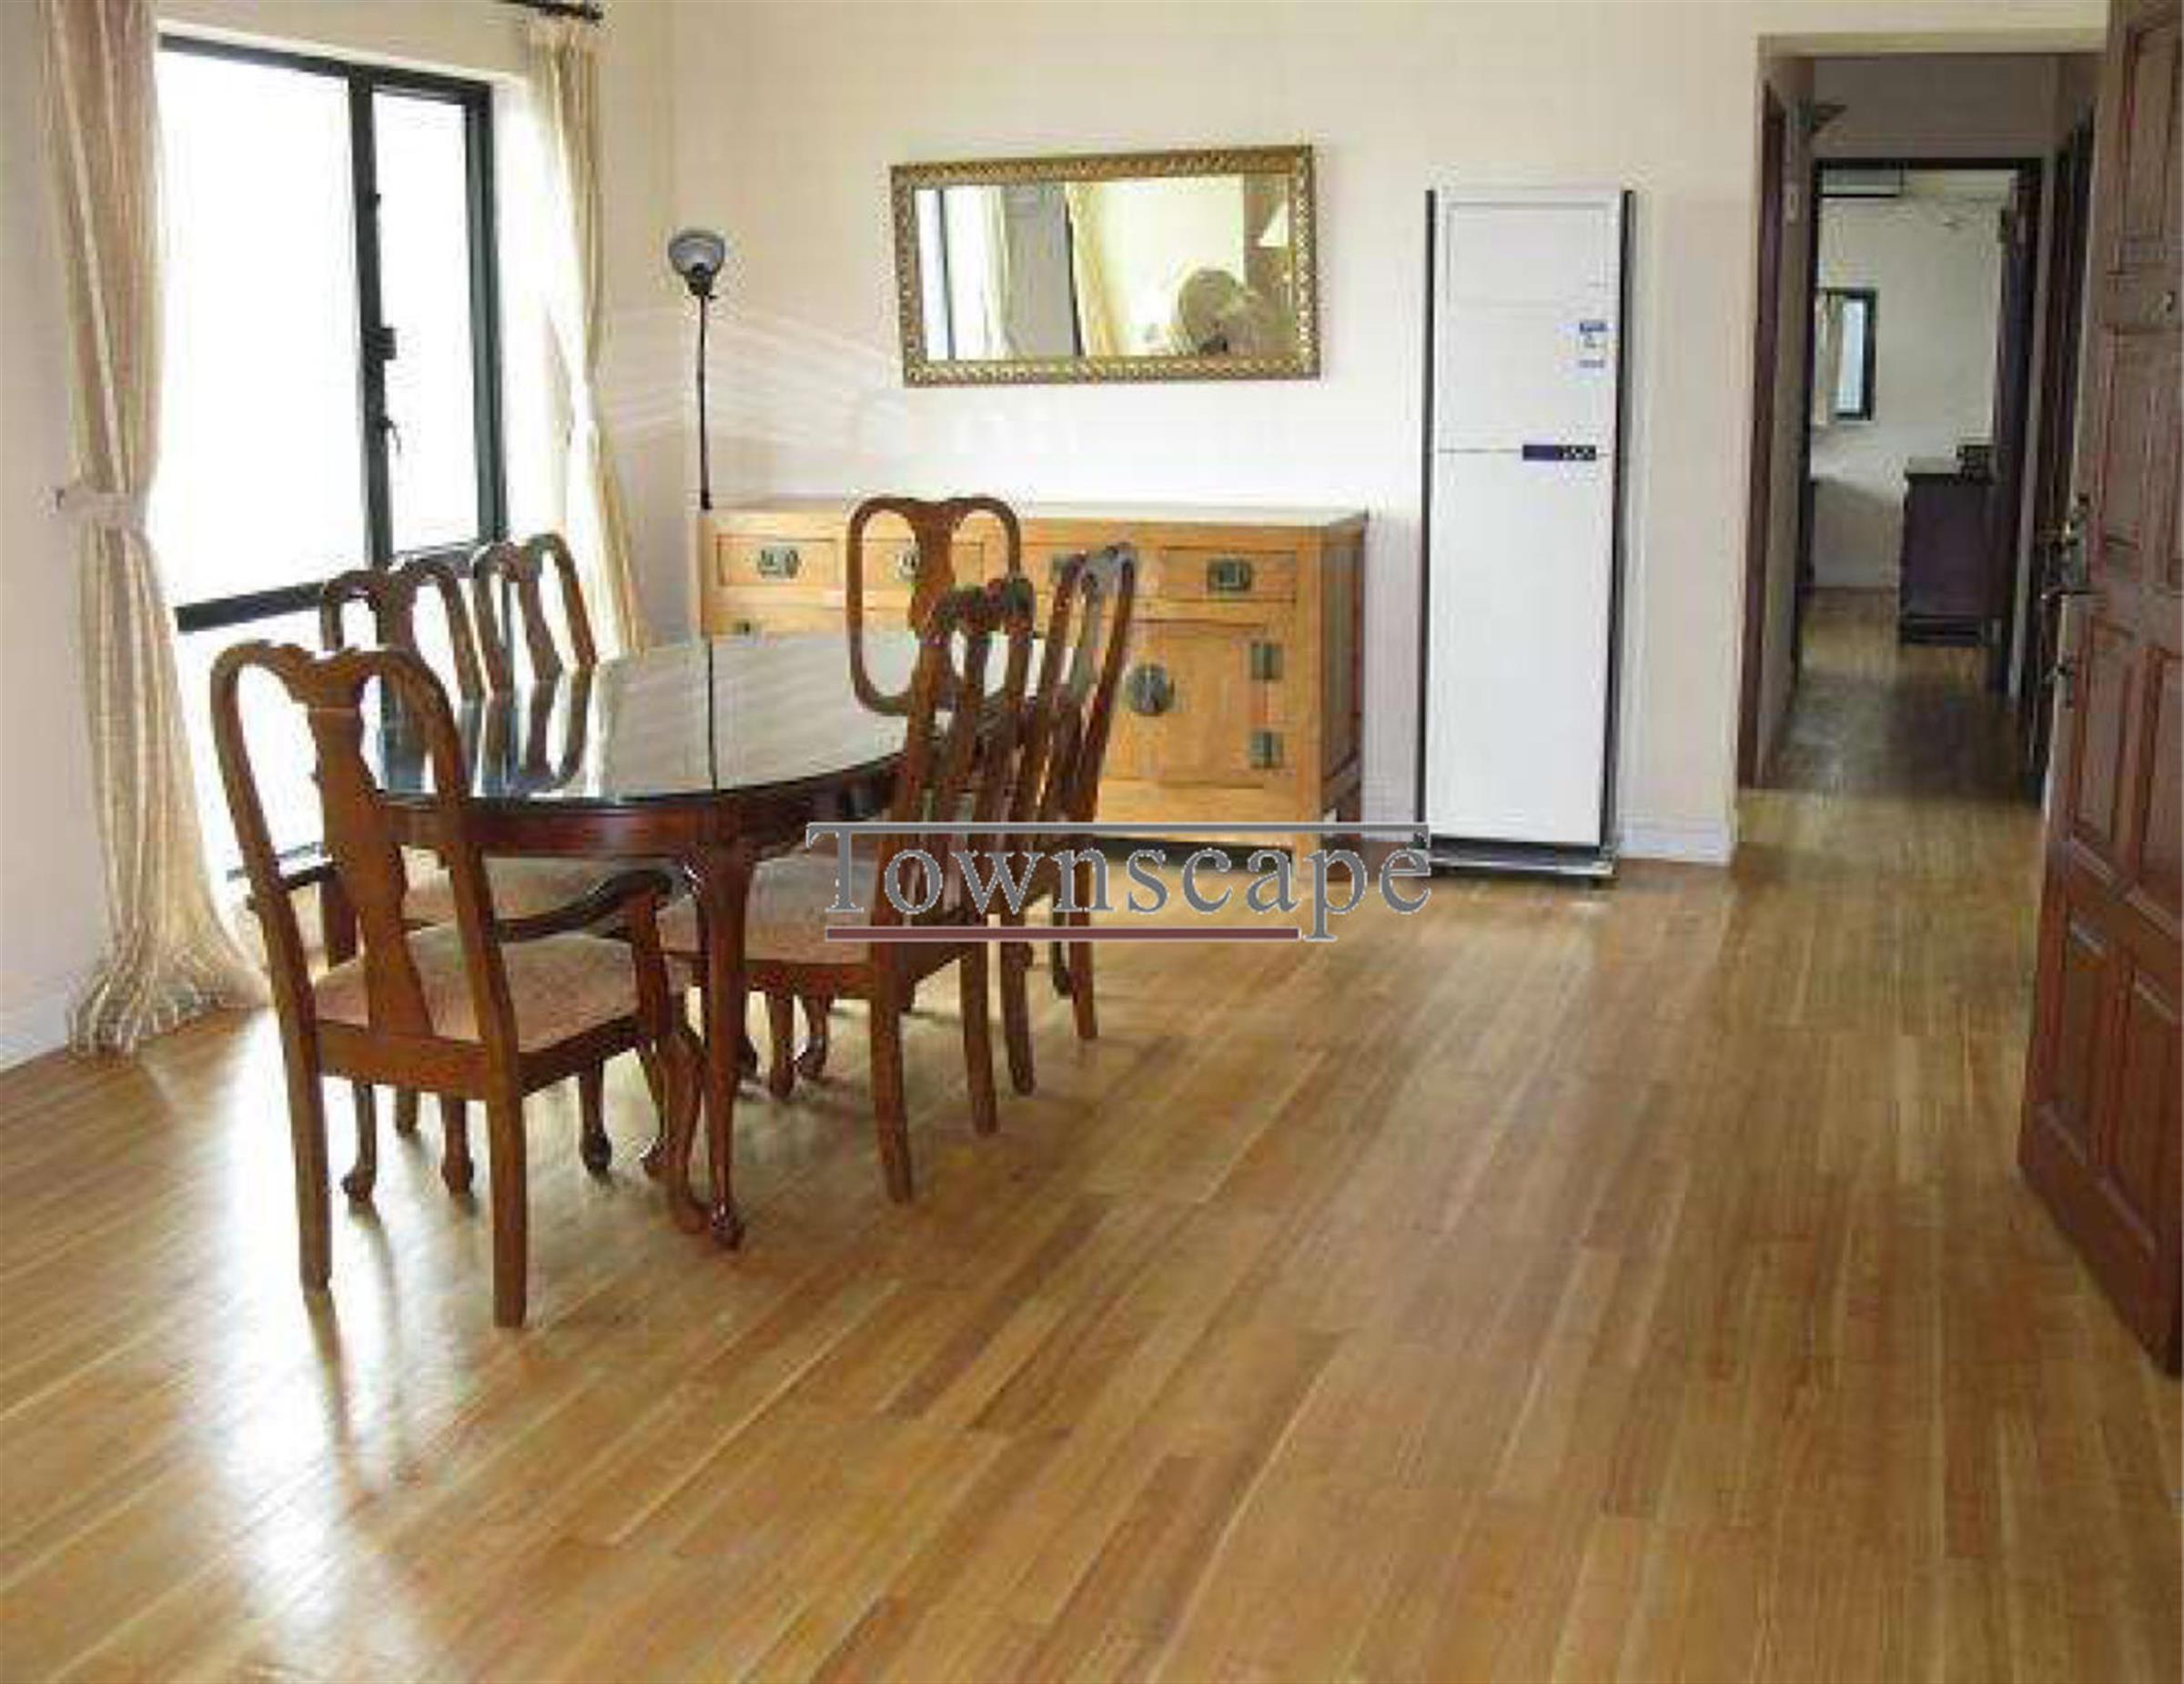 nice floors Great Views, Location, n Price for Large FFC Apt for Rent in Shanghai